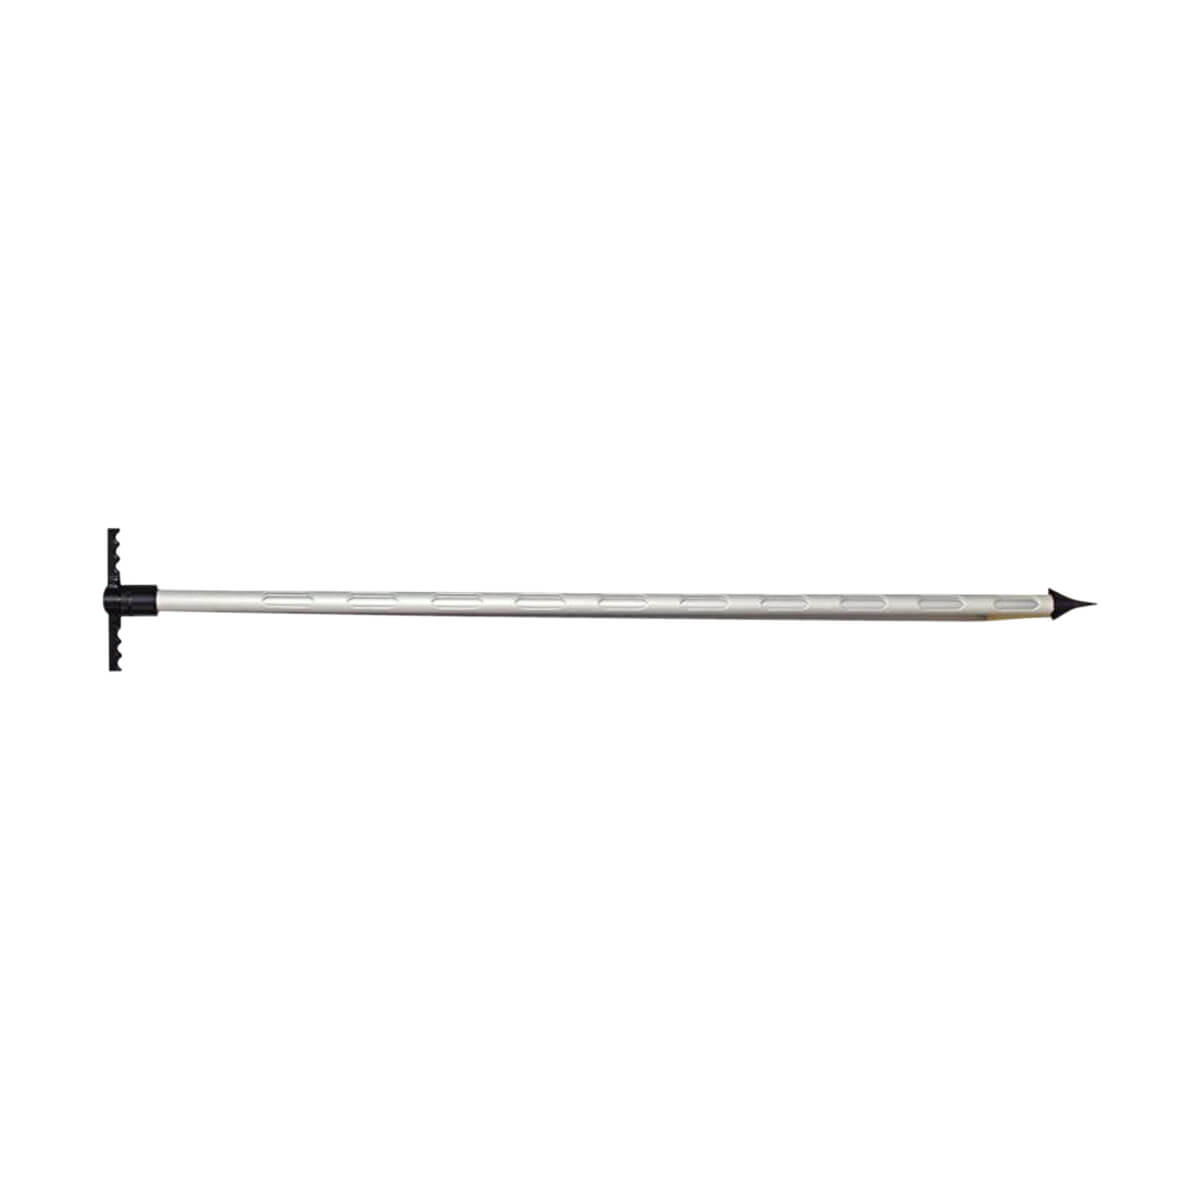 Aluminum Sampler Probe with T-Handle - 6-ft